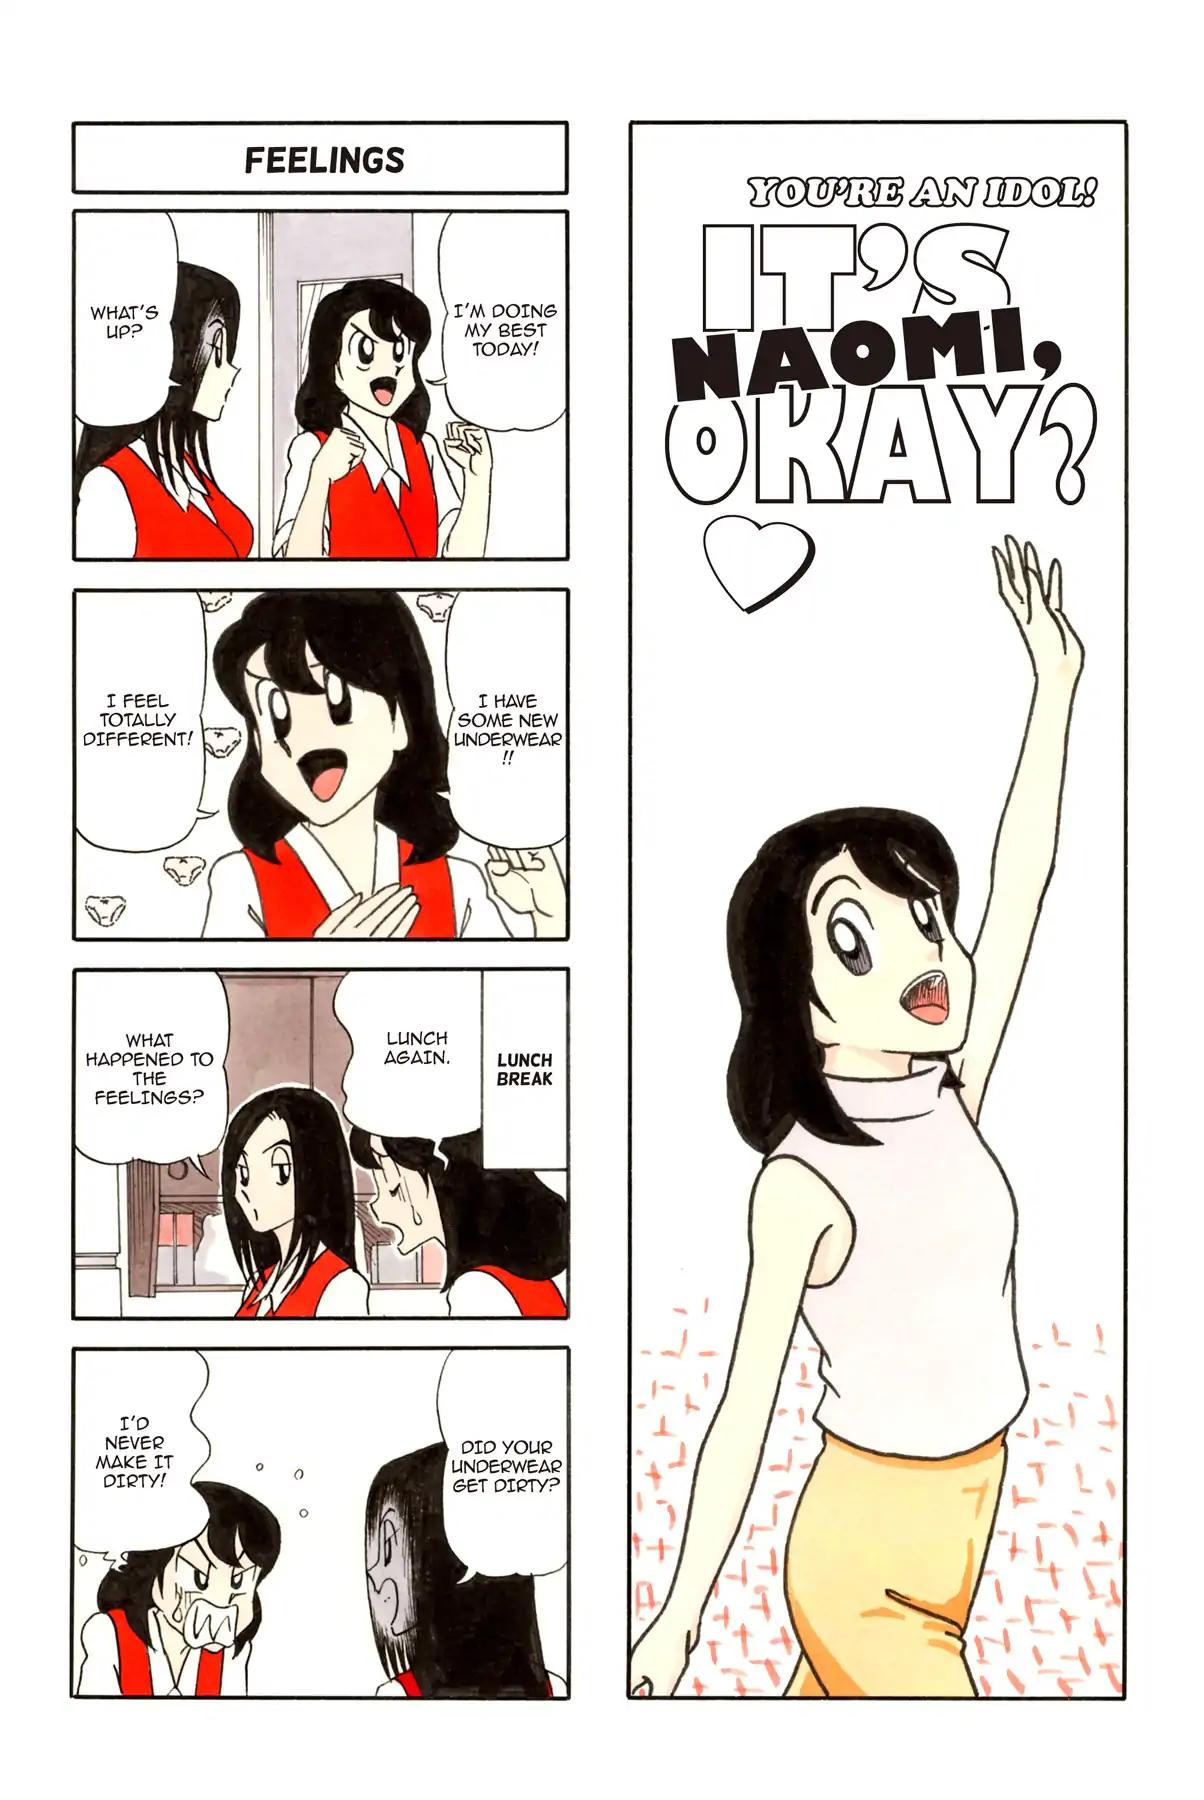 It's Naomi, Okay? After 16 Vol 1 Chapter 30